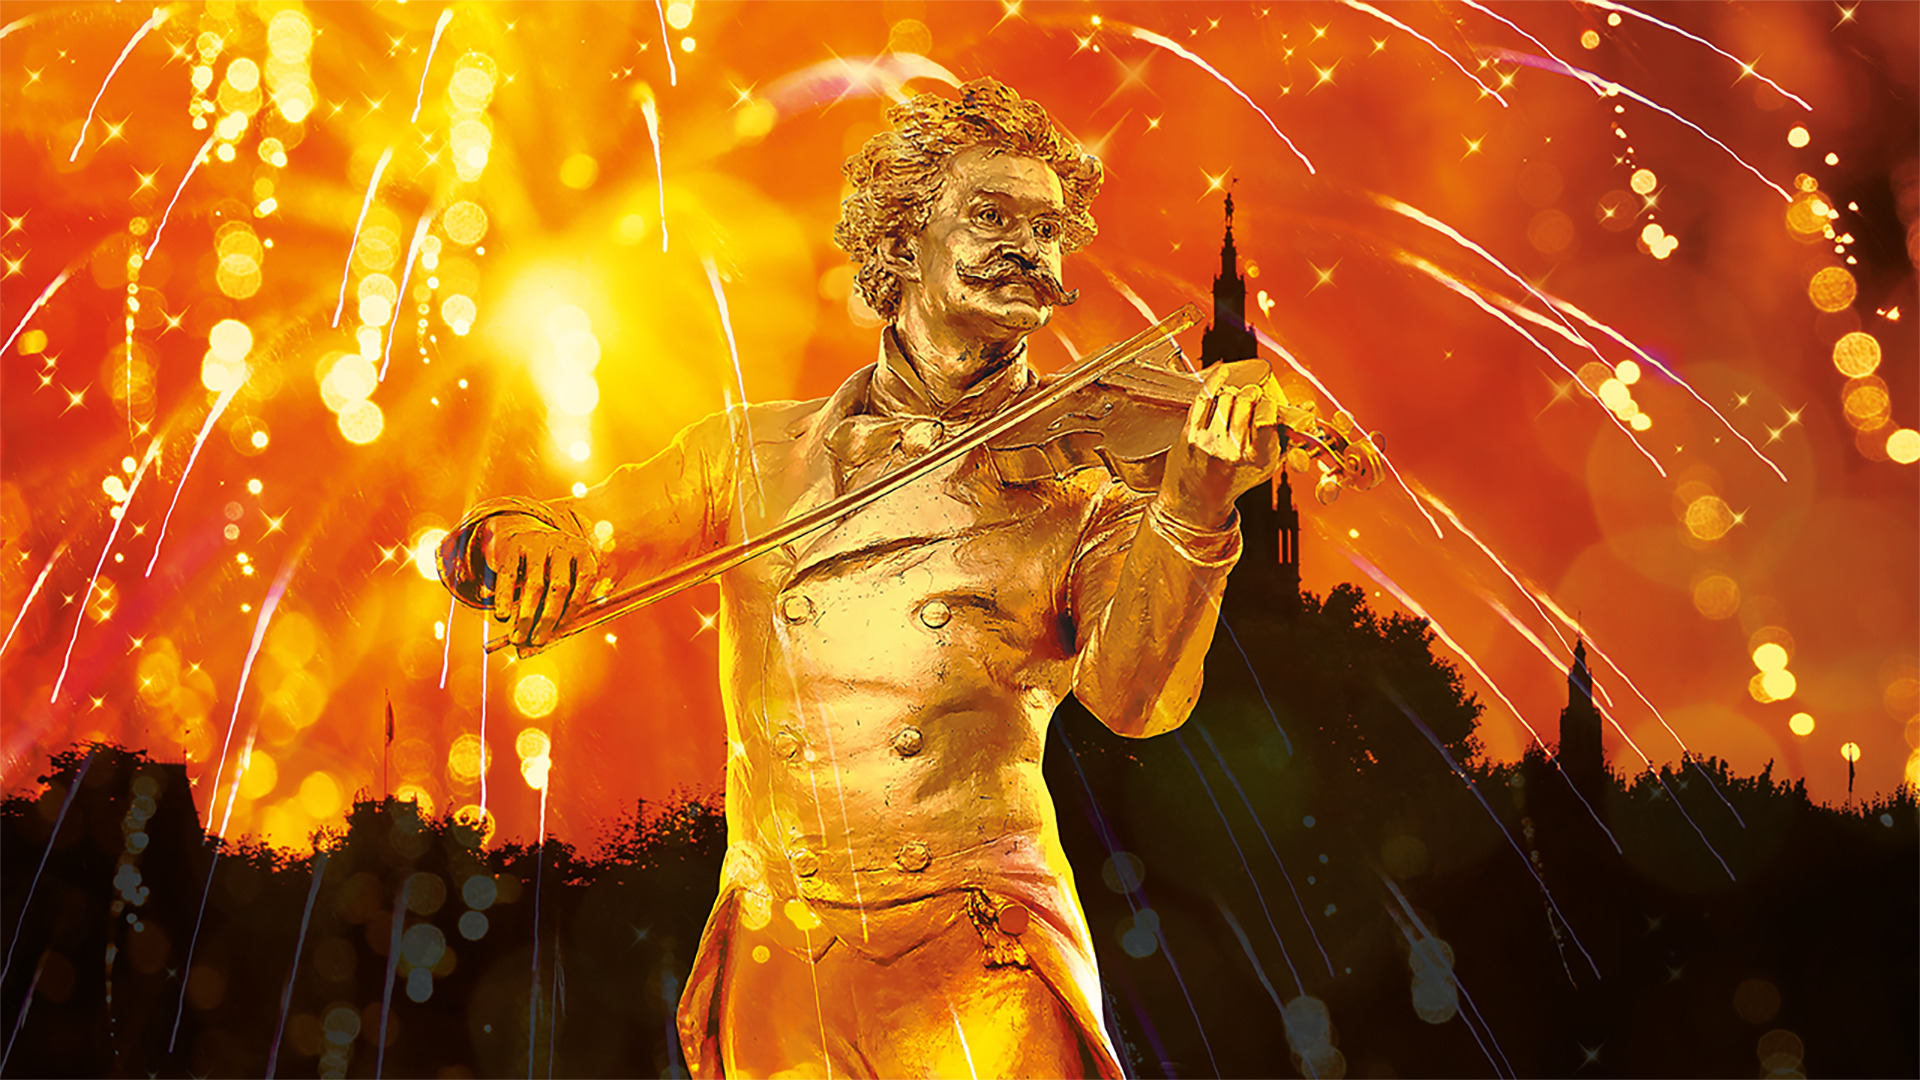 Gold statue playing the violin in front of gold orange fireworks